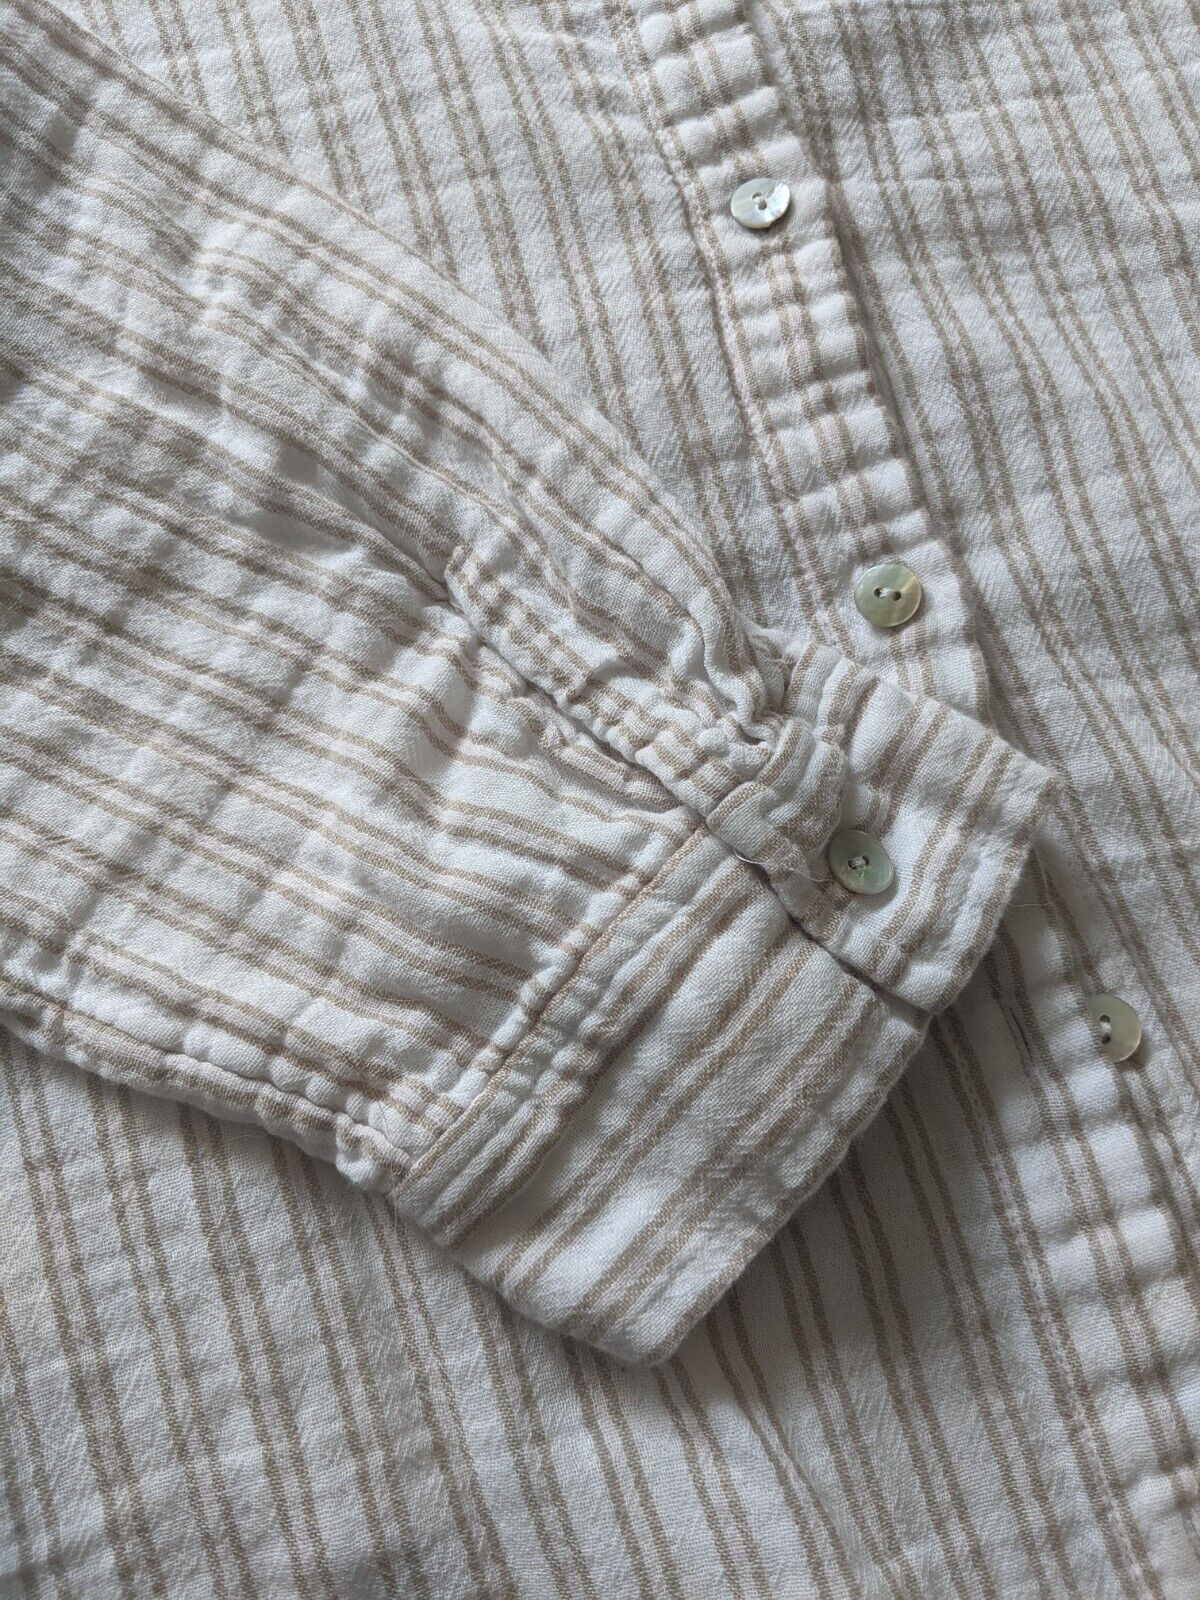 Eileen Fisher Tan And White Stripe Button Down XS… - image 3